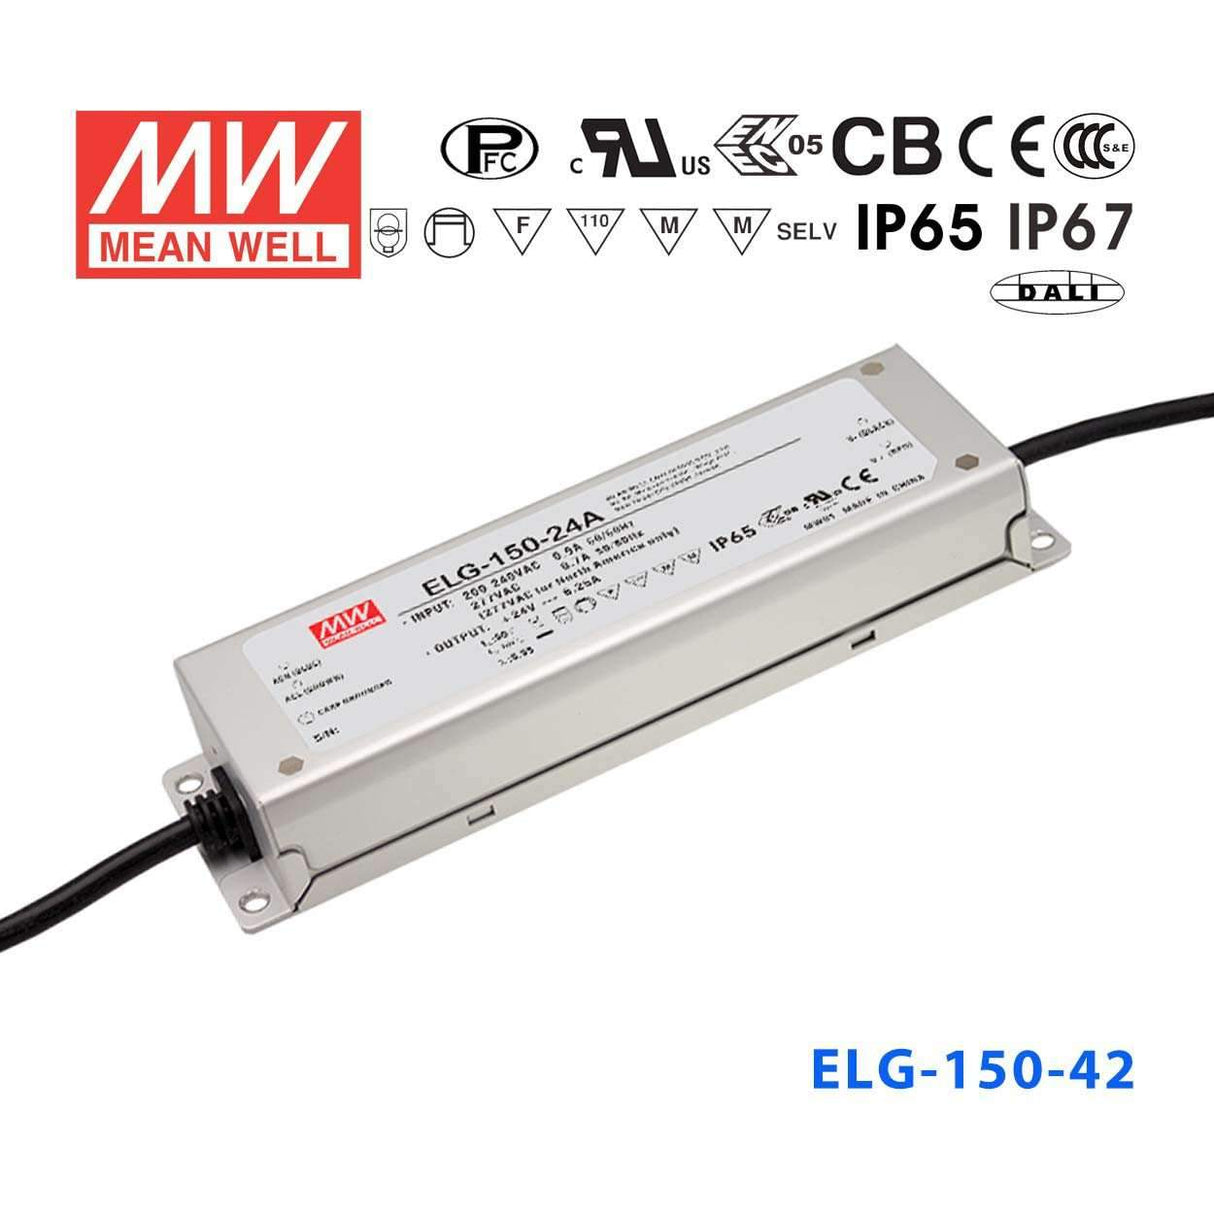 Mean Well ELG-150-42B Power Supply 150W 42V - Dimmable